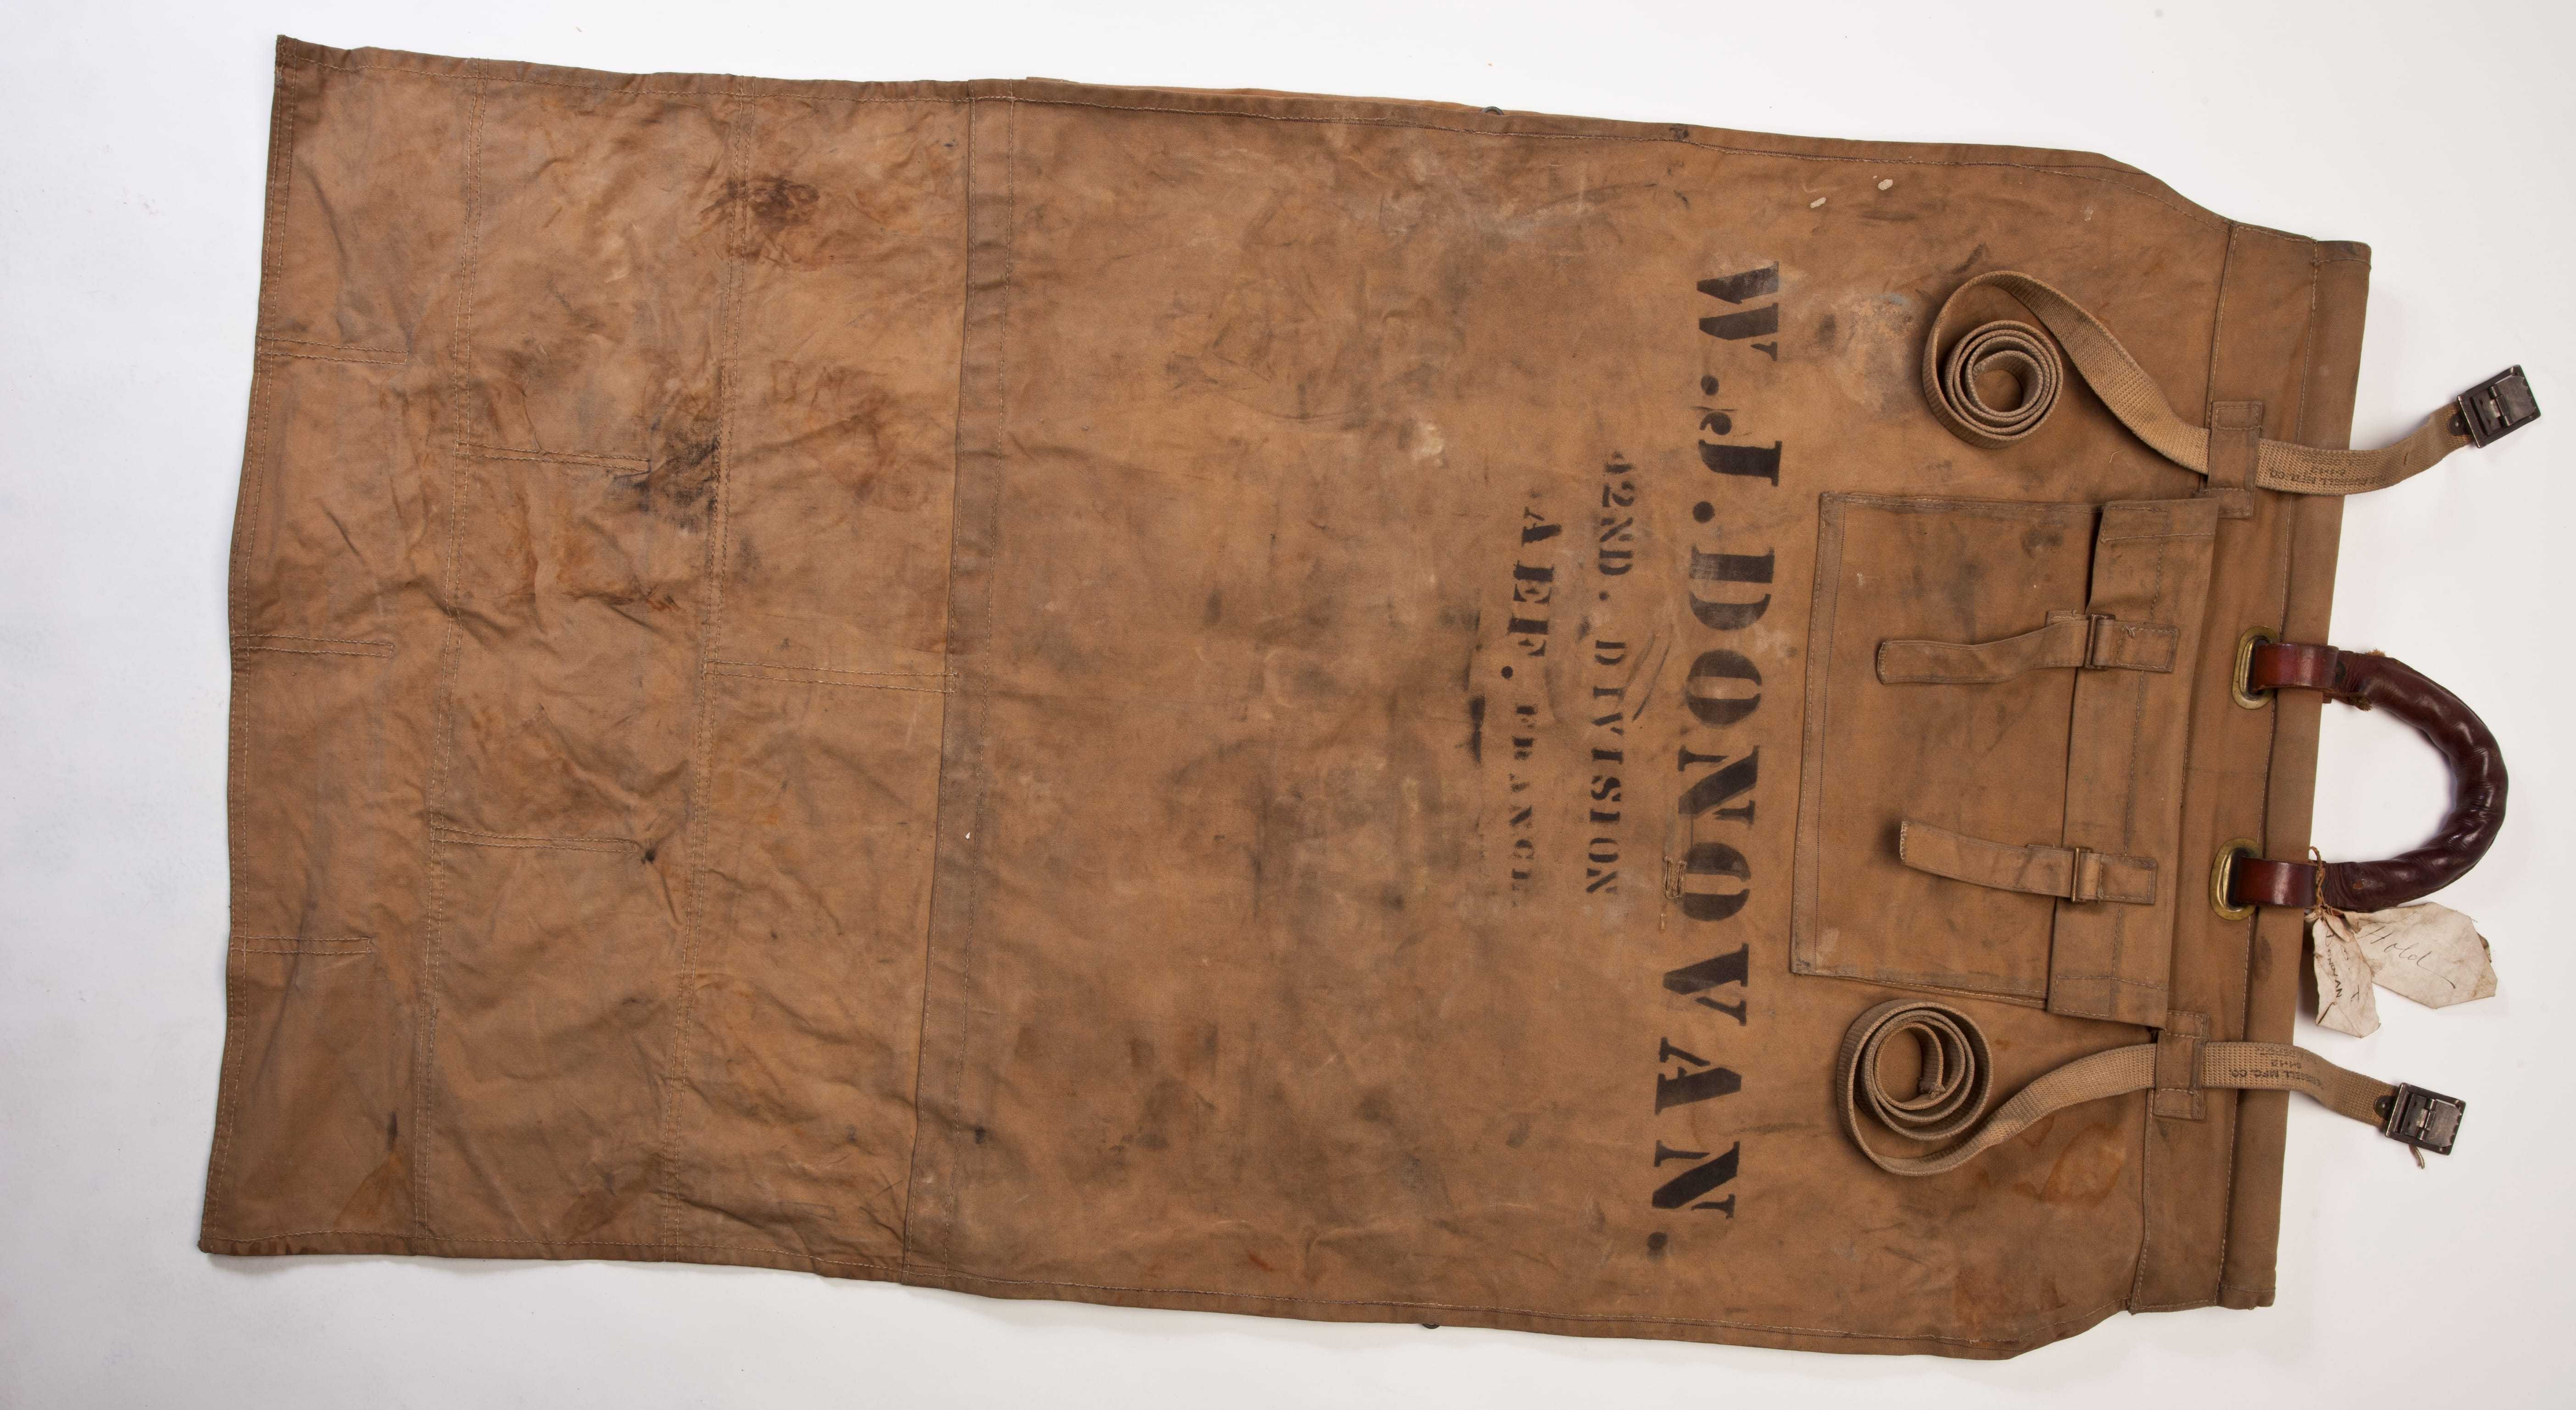 A canvas bag with straps and handles and "W.J. Donovan" printed on the side.